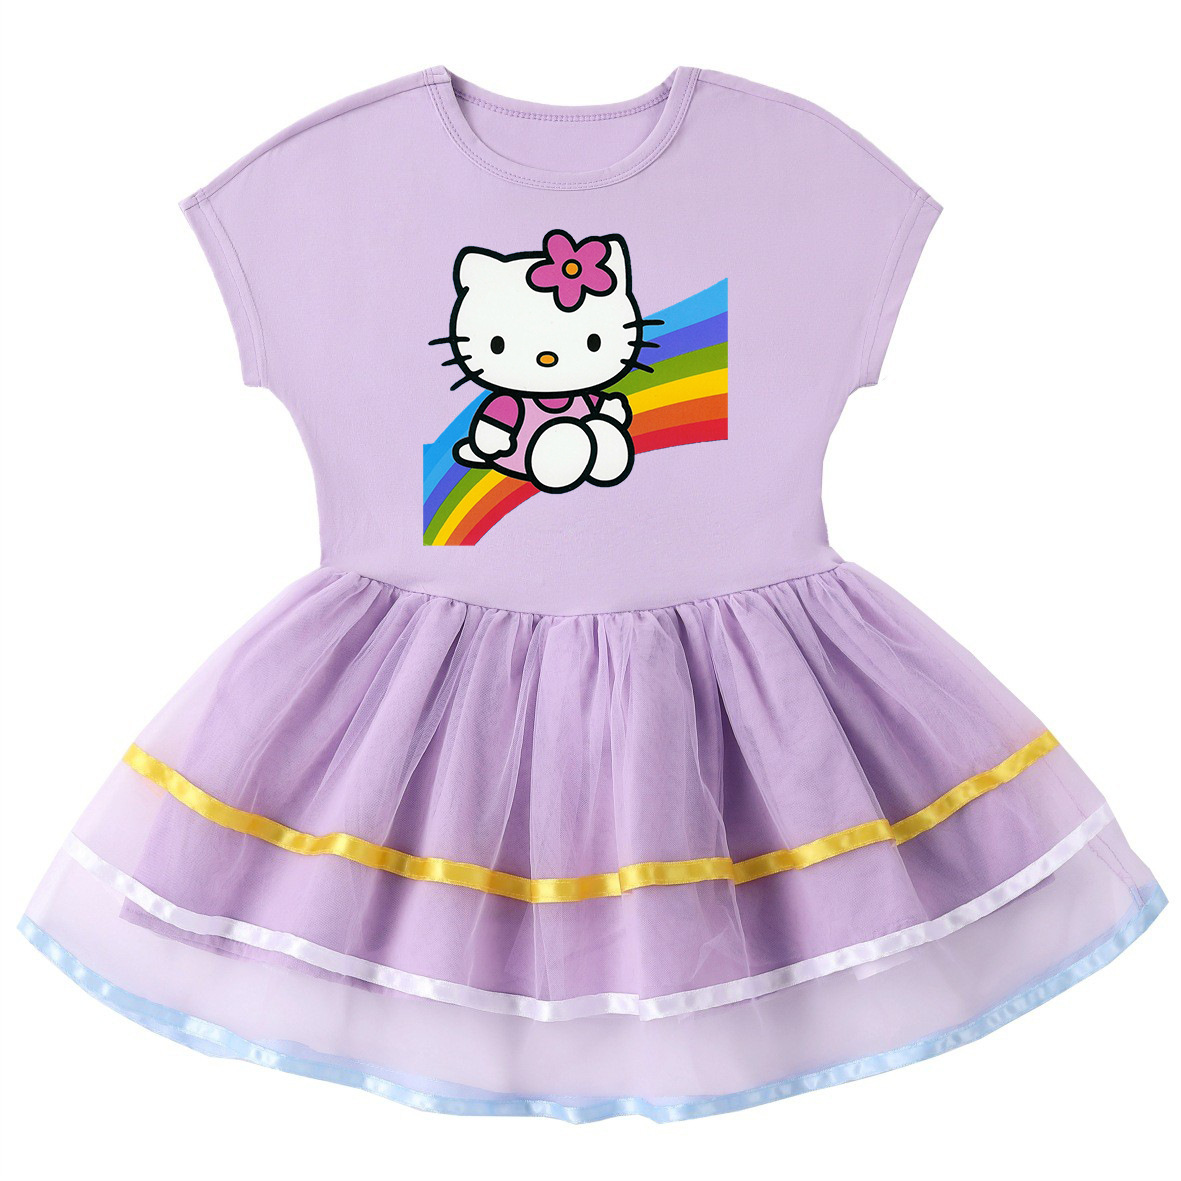 Pin by melissa dishong on Wish list outfits | Hello kitty dress, Hello  kitty clothes, Super cute dresses